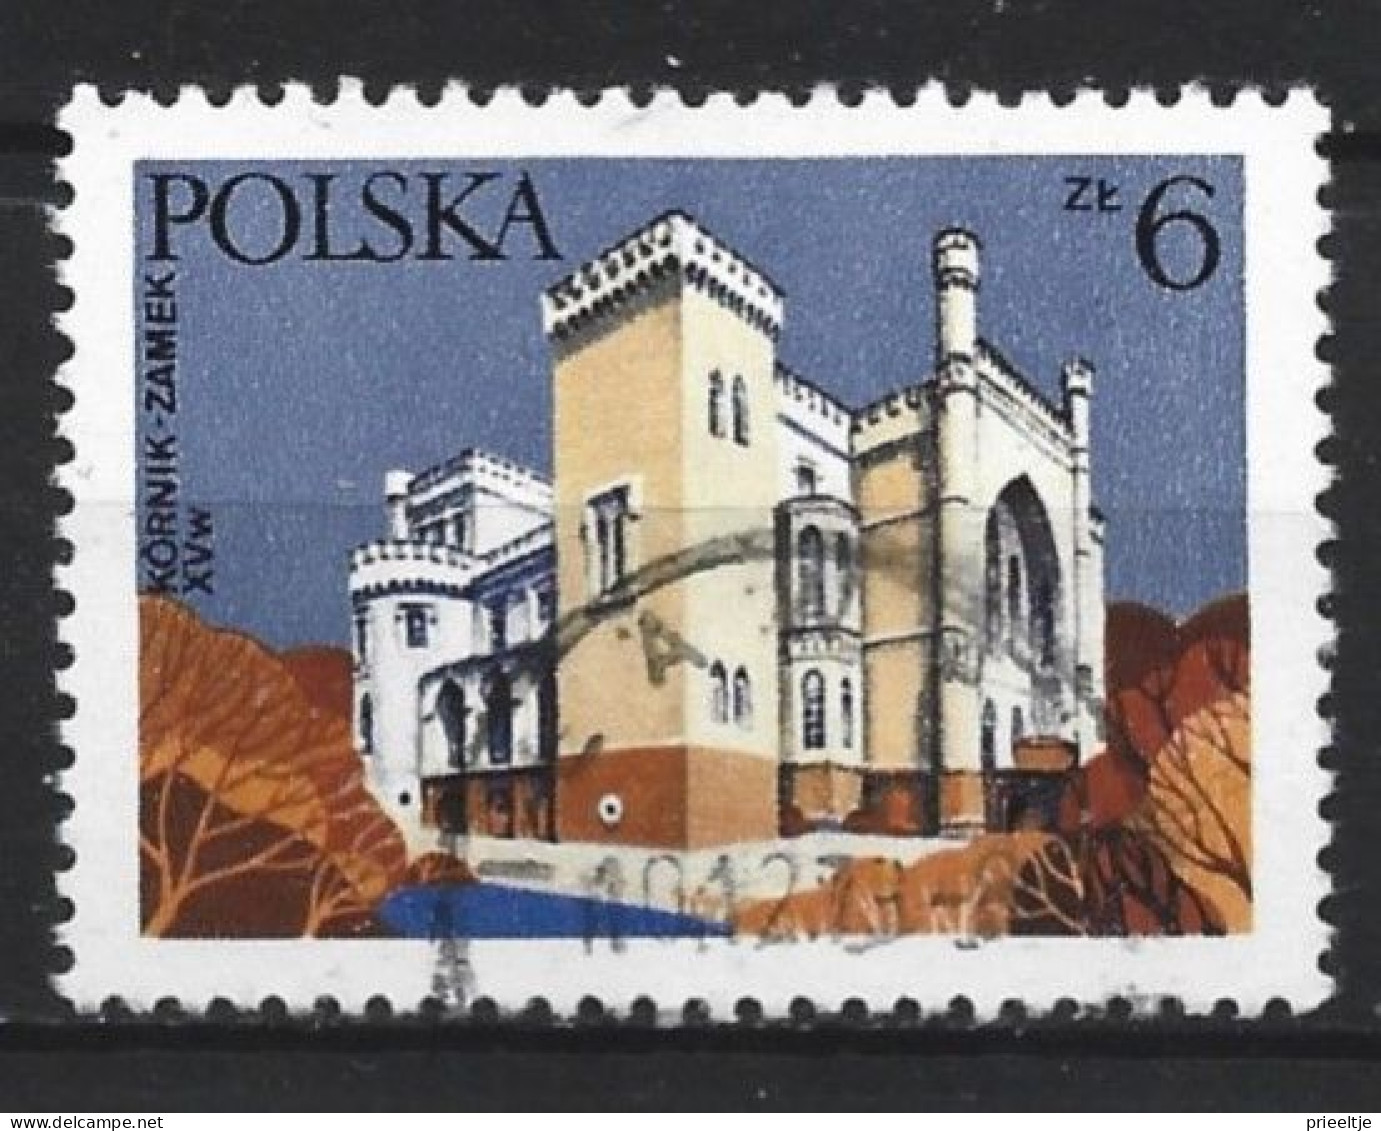 Poland 1977 Architectural Monuments Y.T. 2364 (0) - Usati